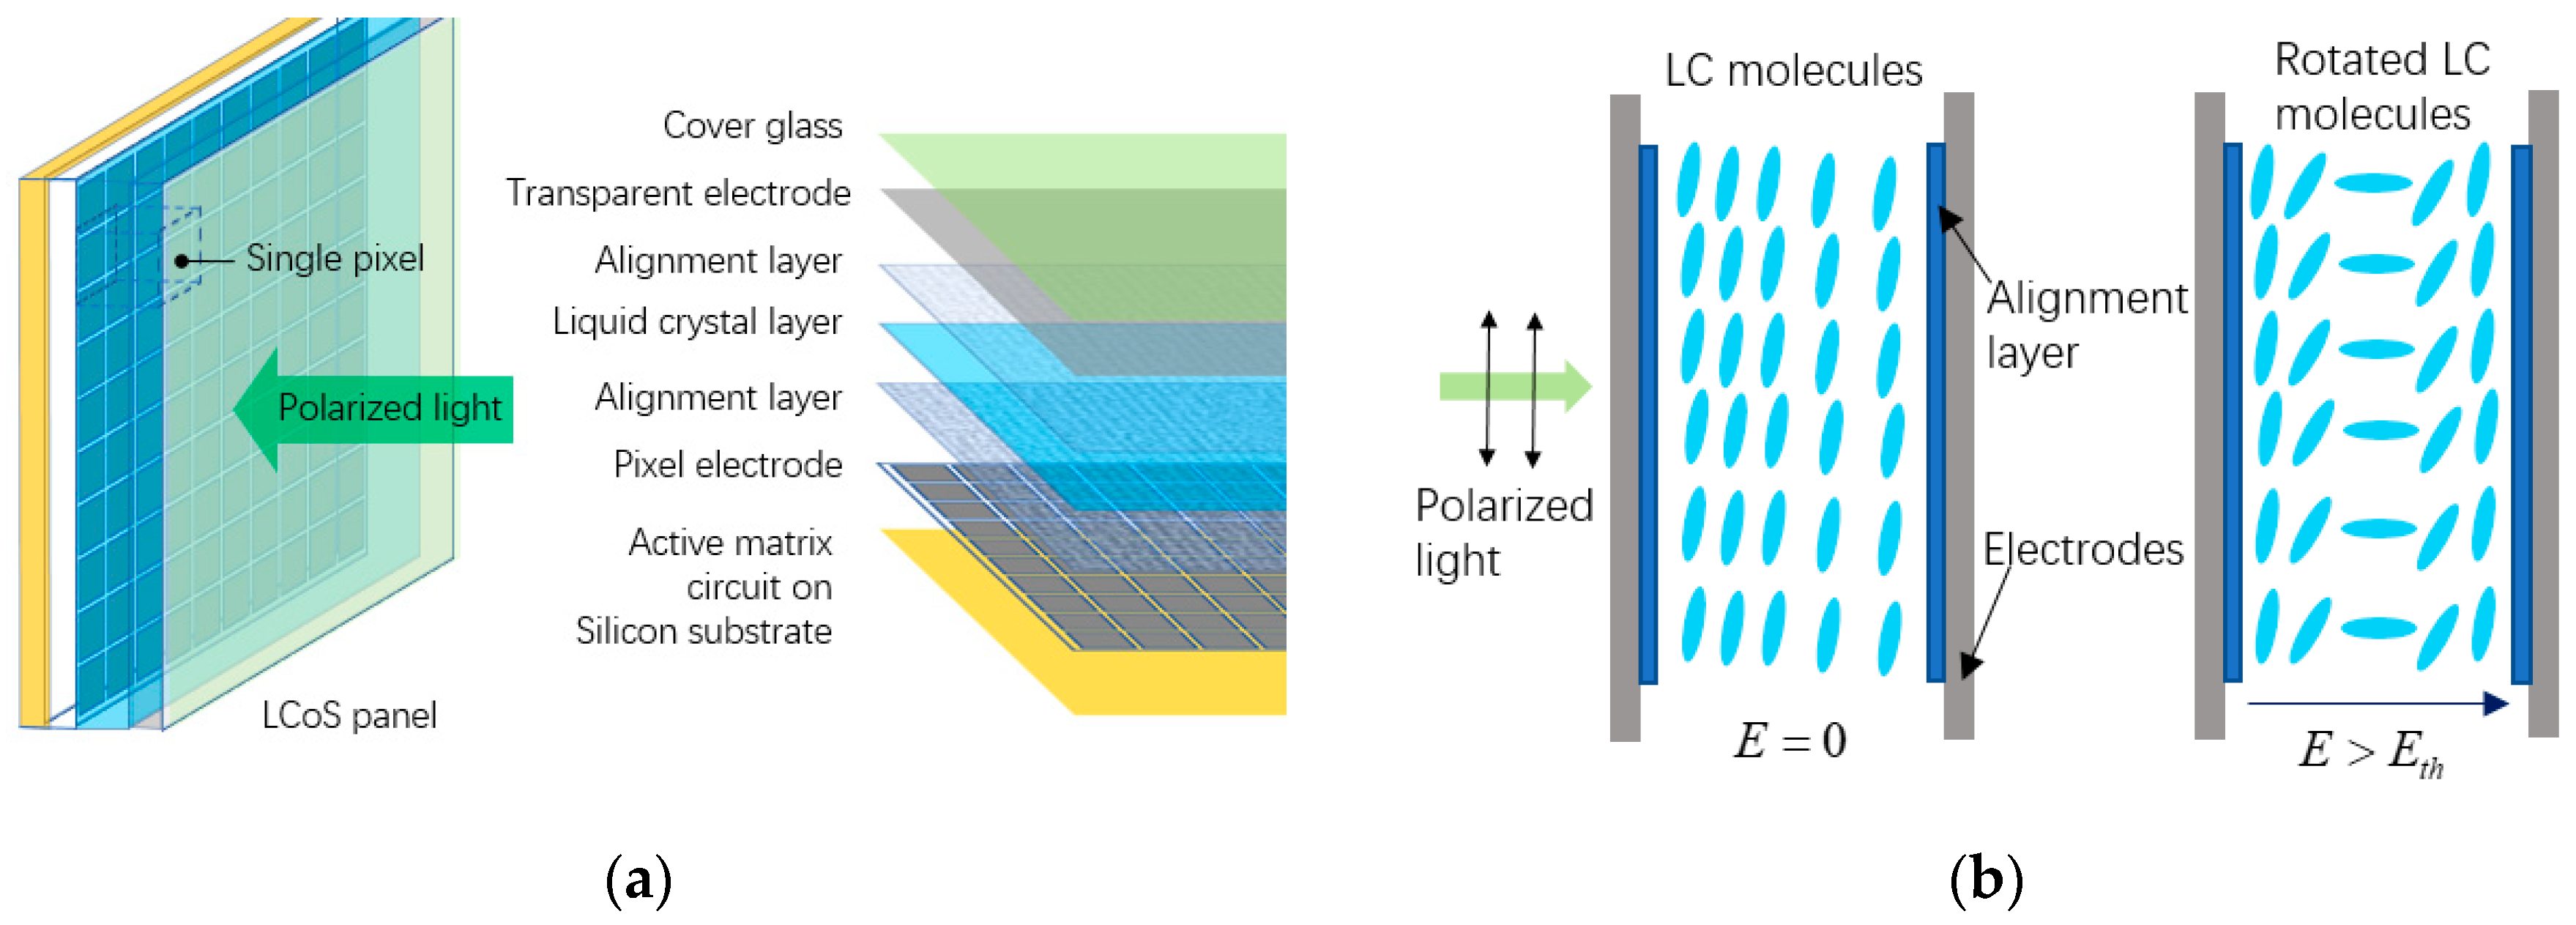 Applied Sciences | Free Full-Text Progress in Phase Calibration for Liquid Crystal Spatial Light Modulators